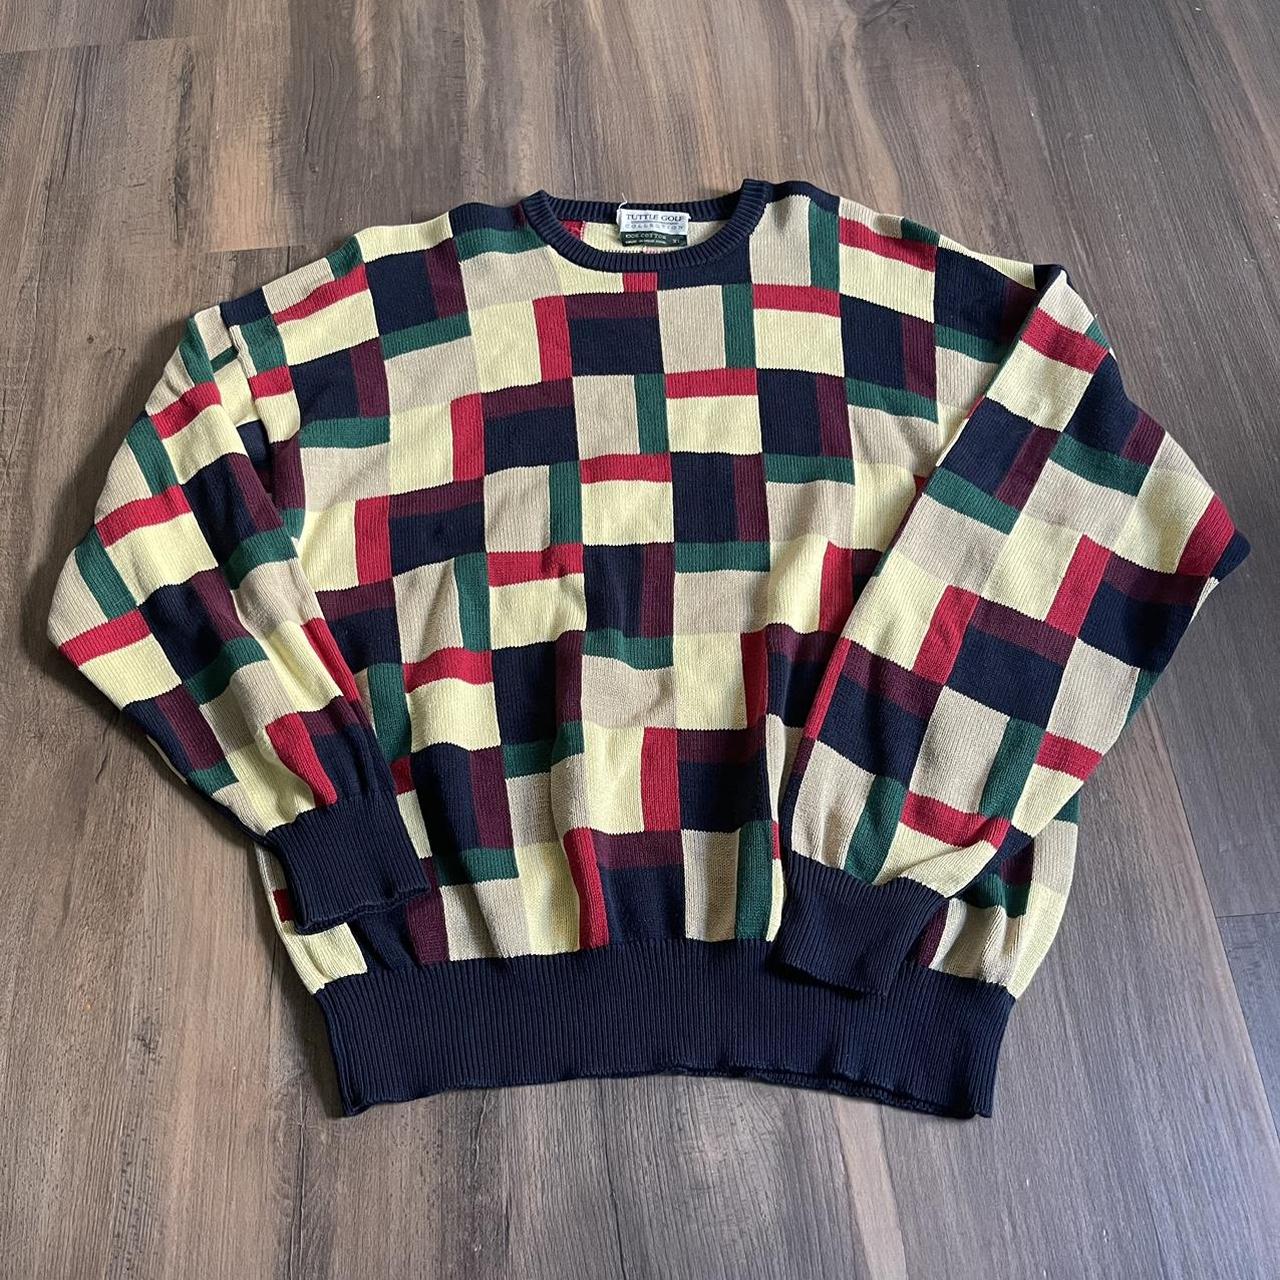 1990s multi colored sweater Great condition - not... - Depop